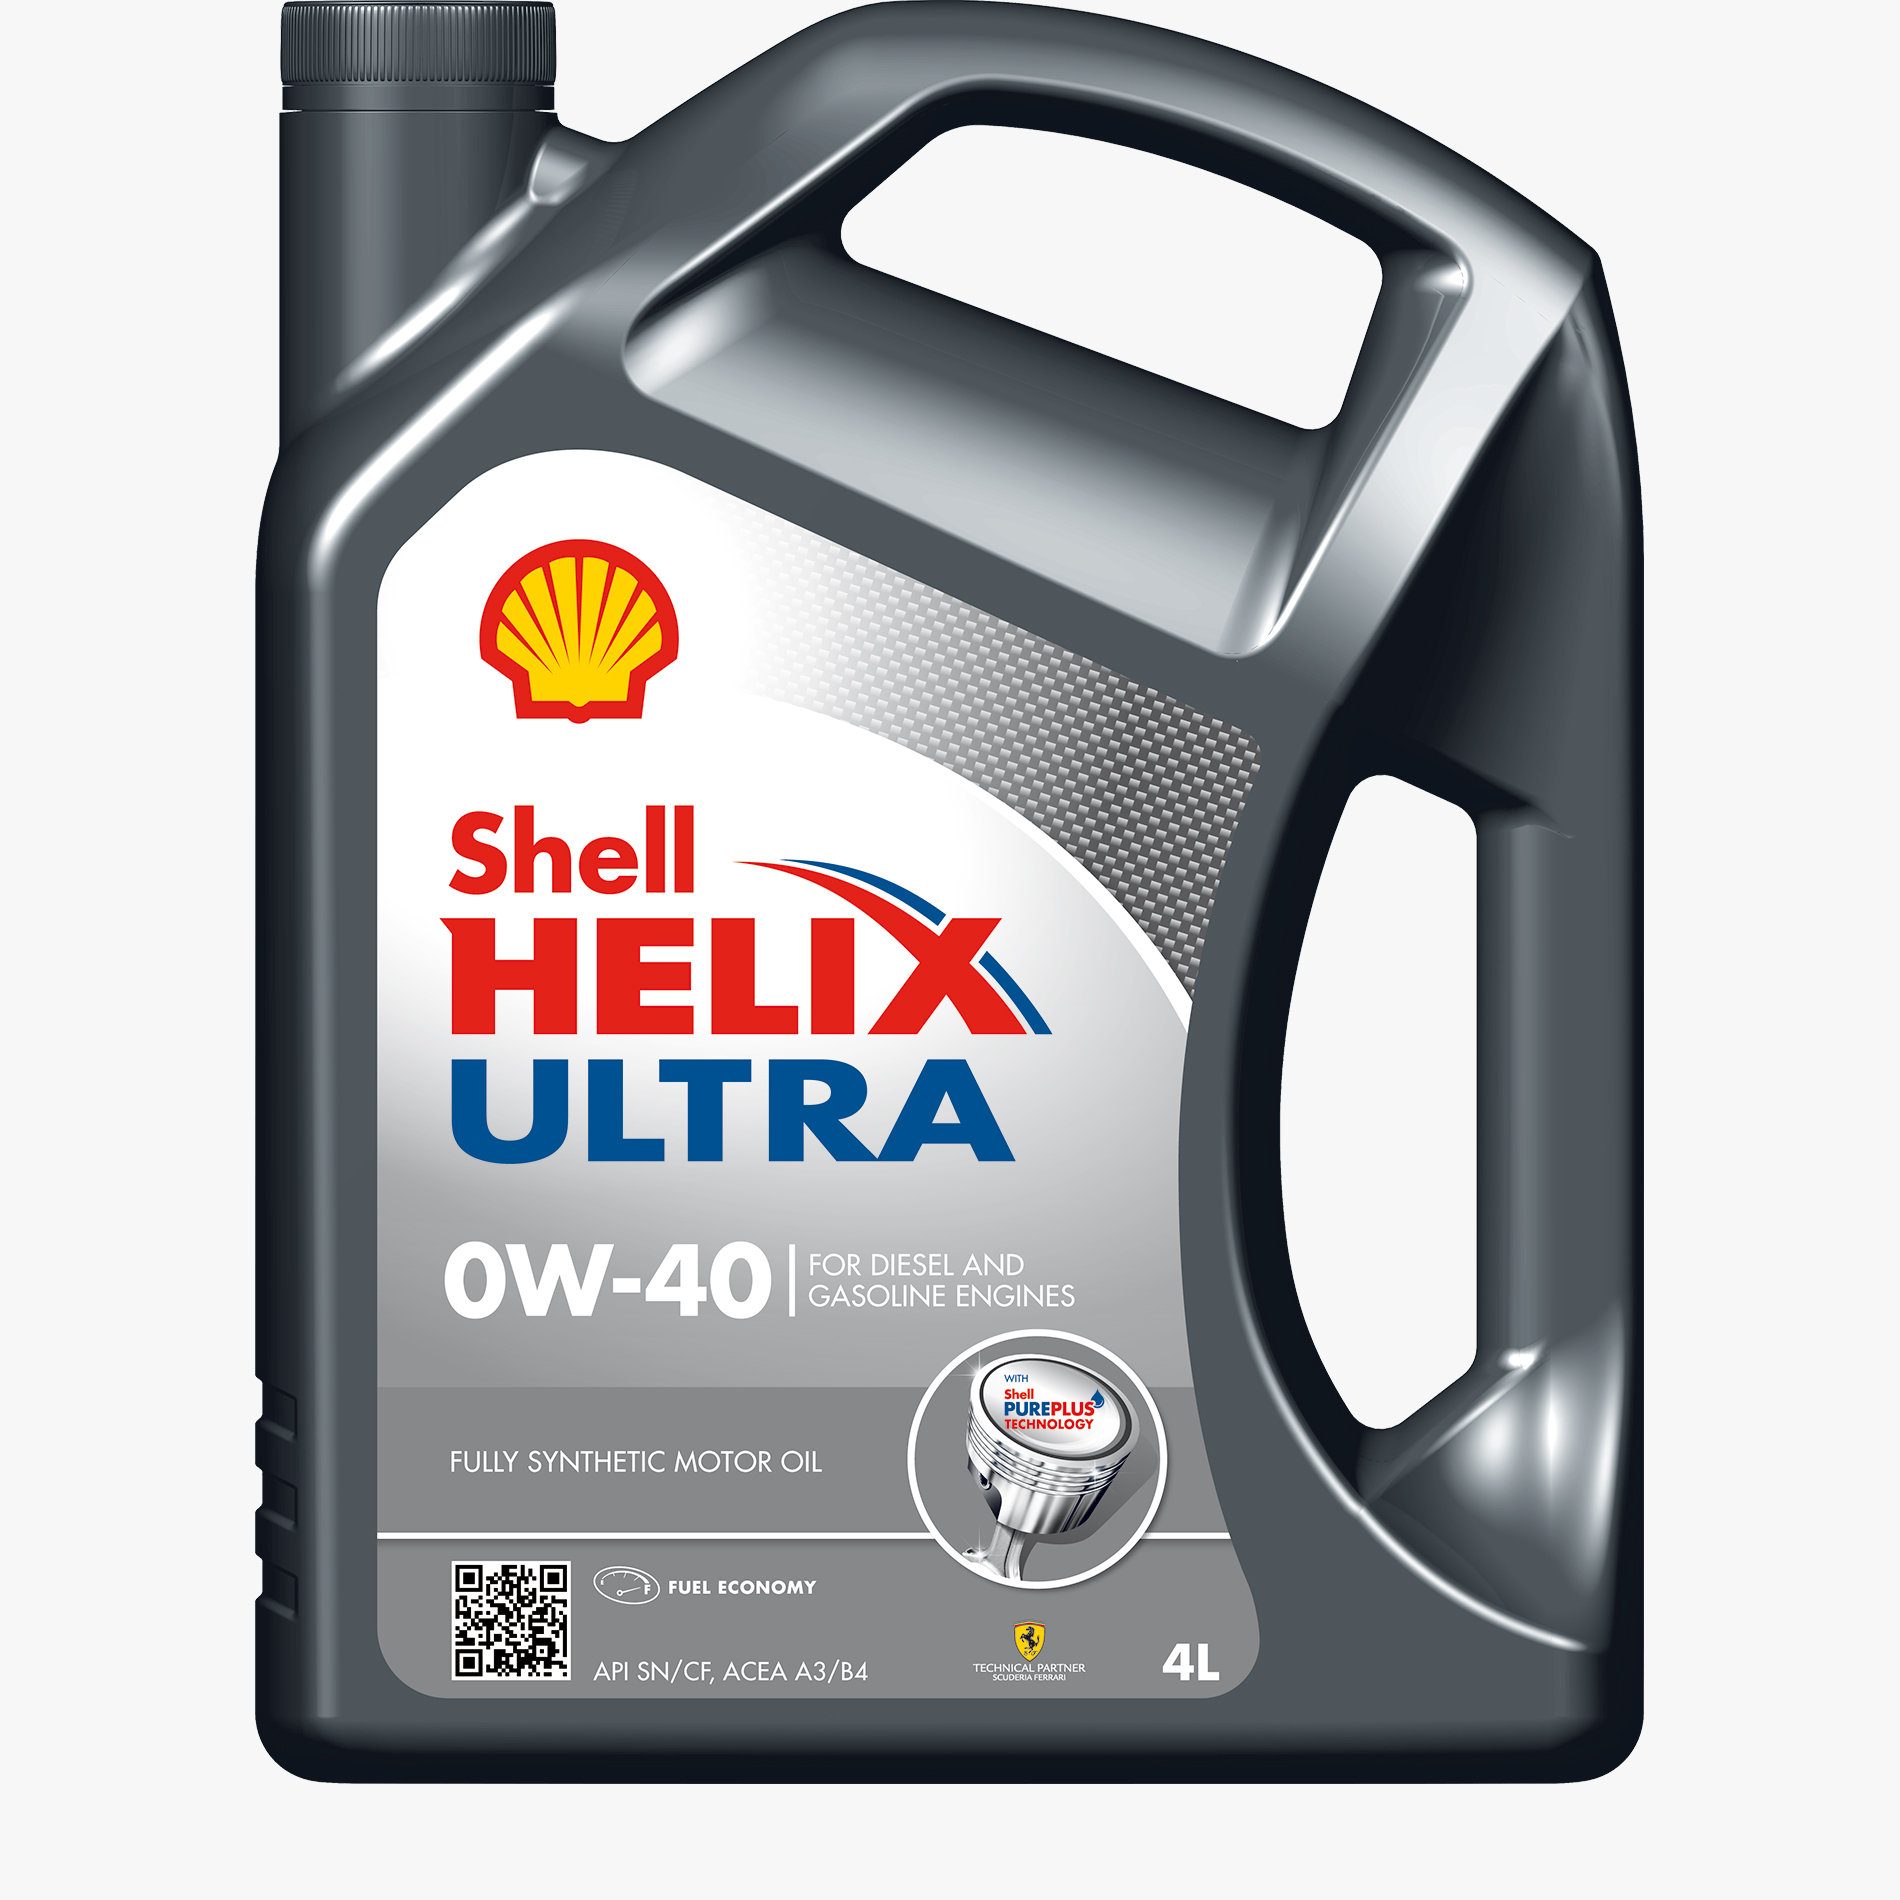 Shell 550021605 Engine oil Shell Helix Ultra 0W-40, 4L 550021605